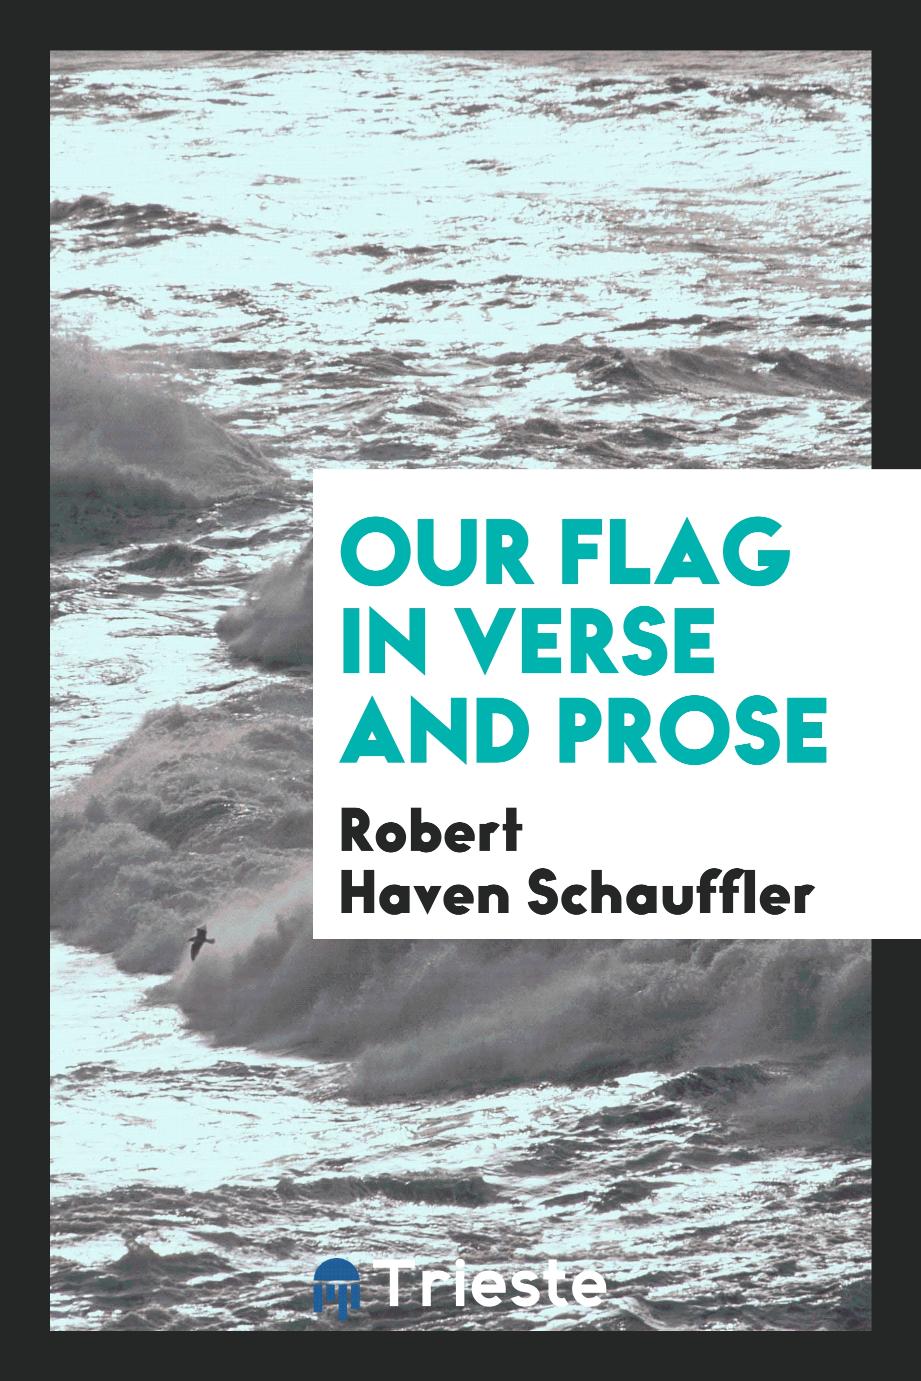 Our flag in verse and prose